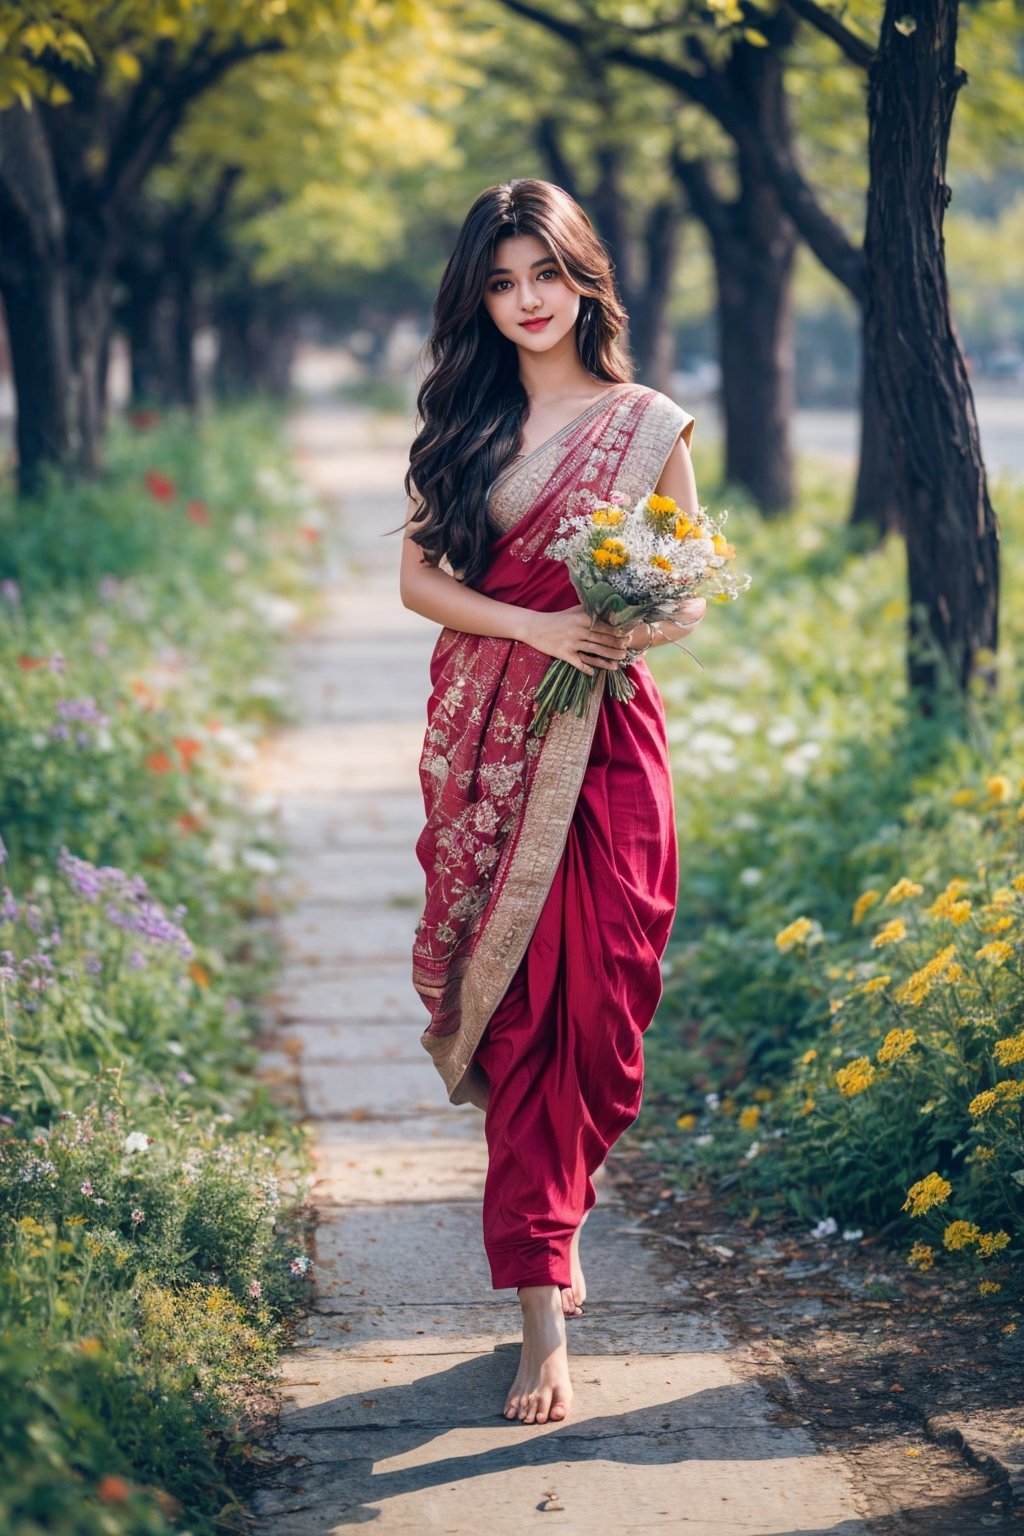 lovely cute young attractive indian girl, brown eyes, gorgeous actress, 19 years old, cute, an Instagram model, long blonde_hair, colorful hair, winter, Indian, Walking barefoot along a path, holding a bouquet of wildflowers,vonnyfelicia